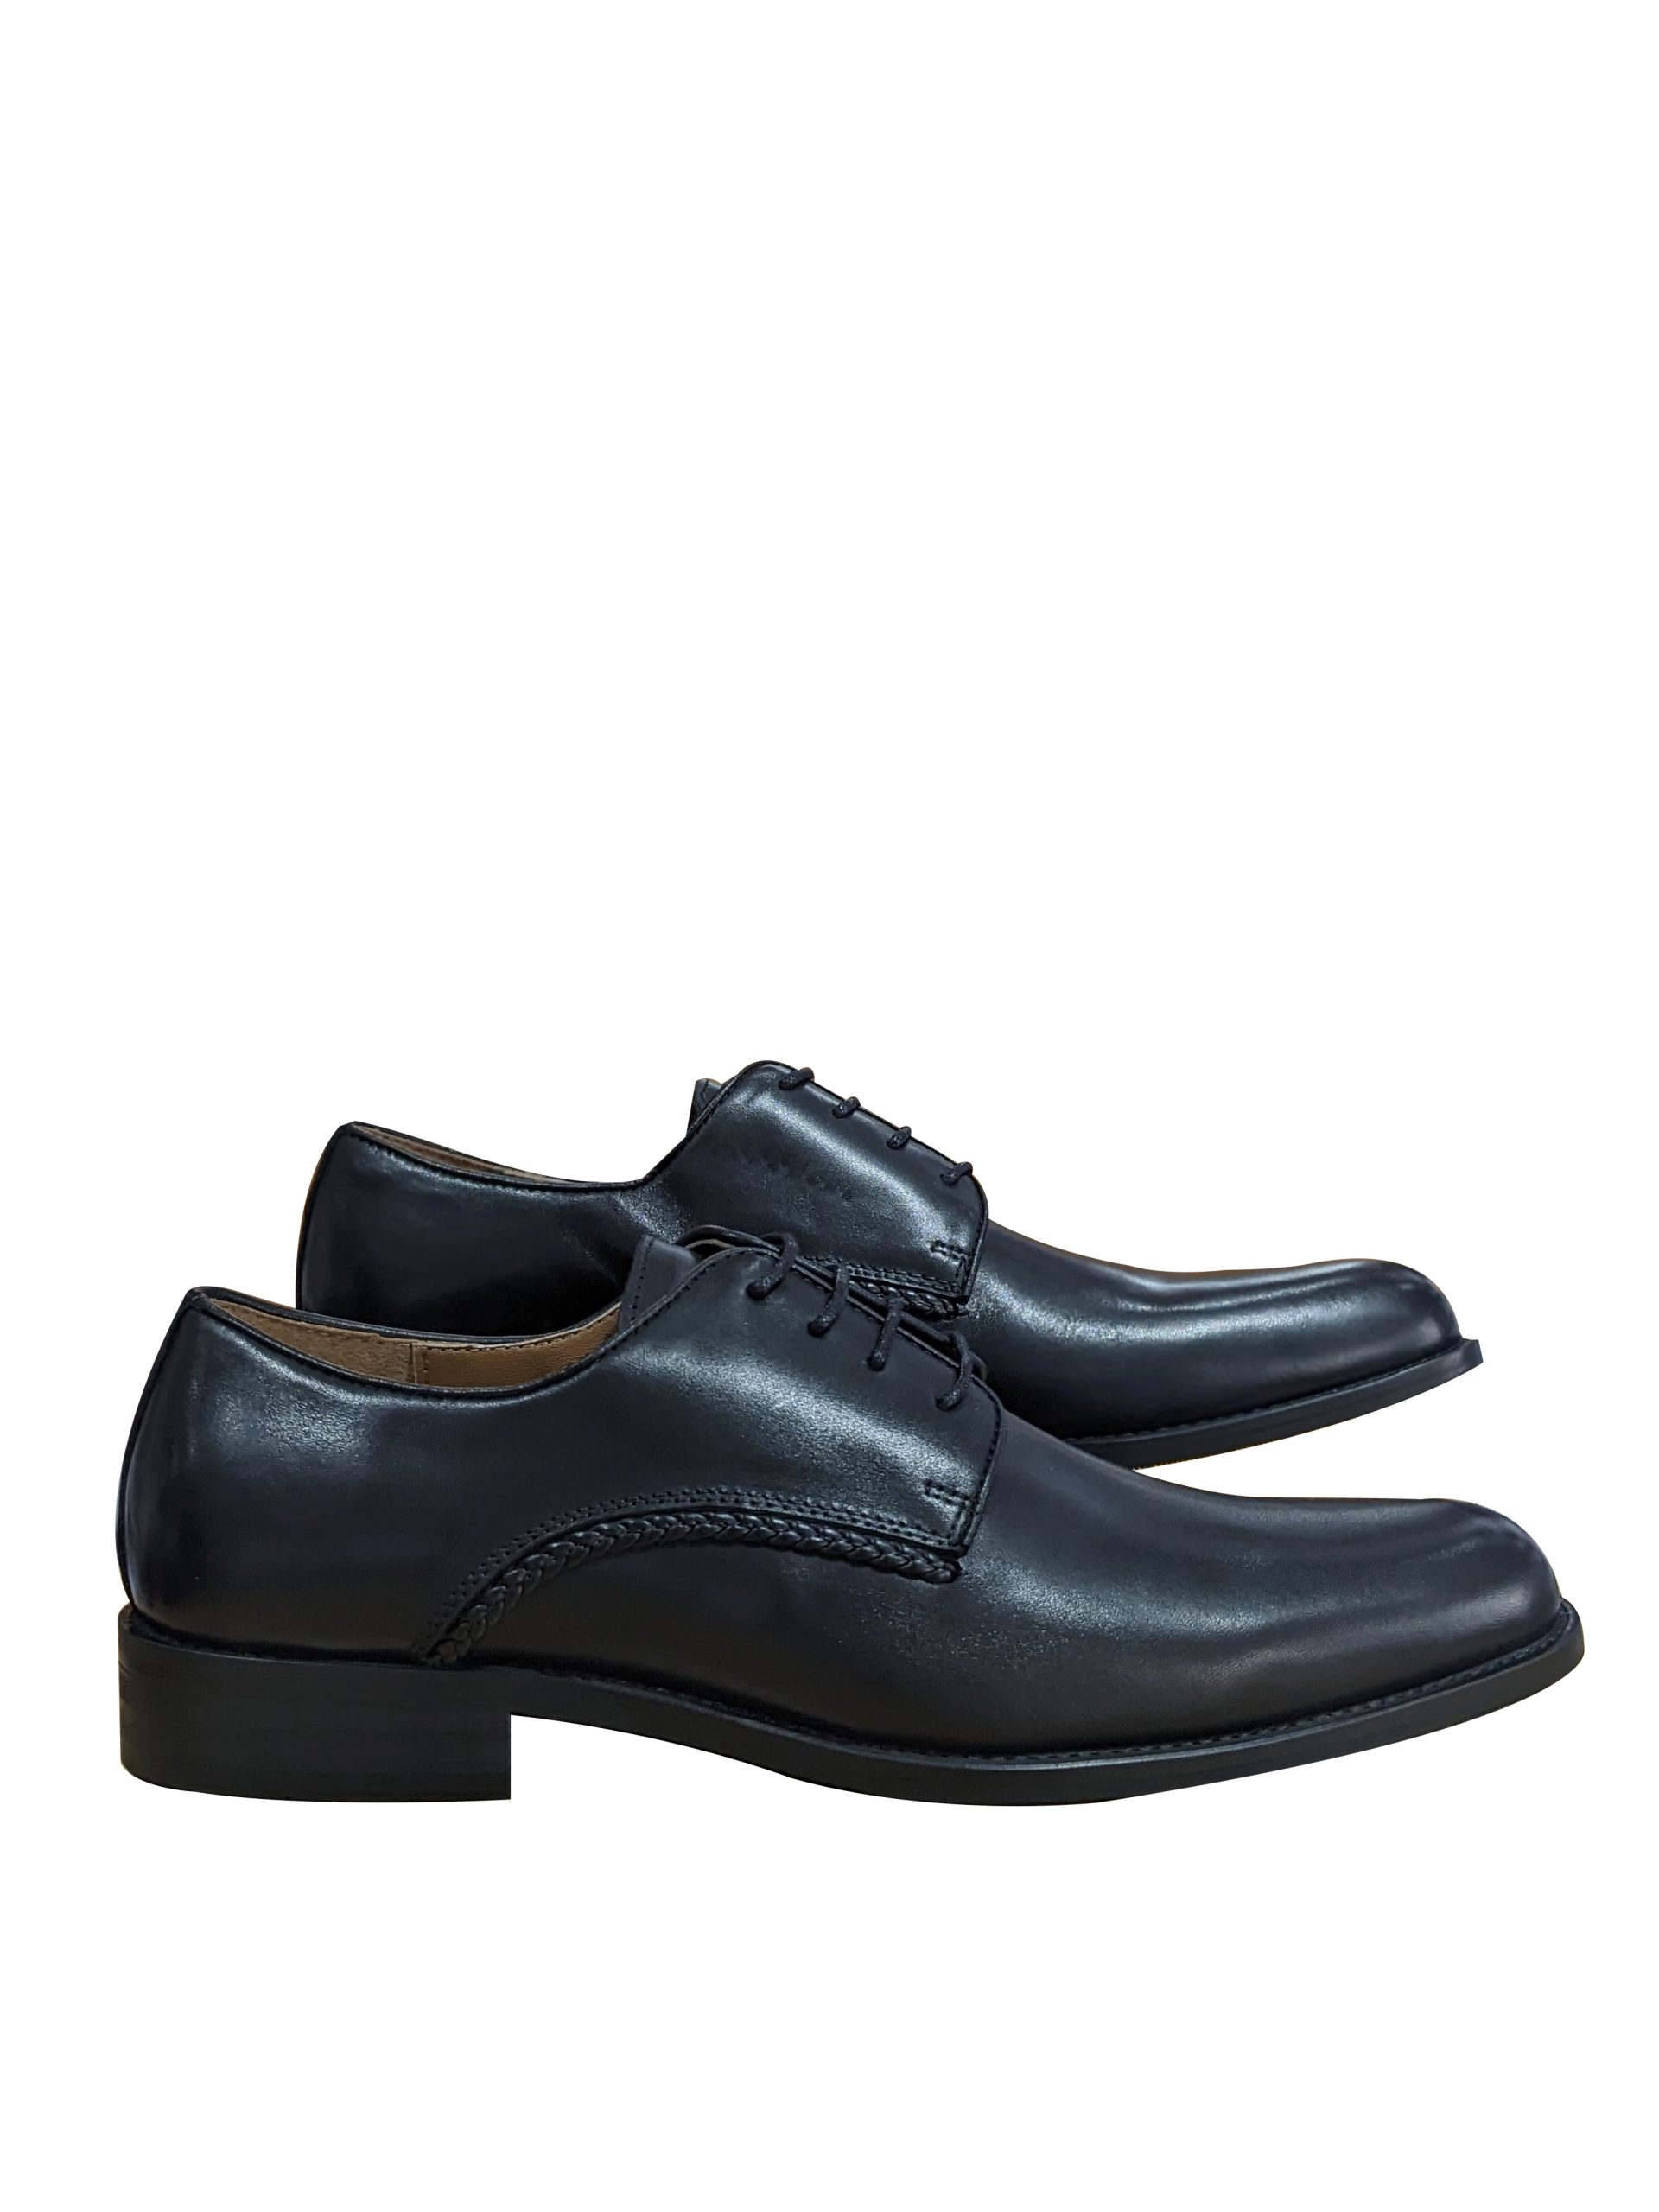 Classic Anax New Collection Shoes for Men